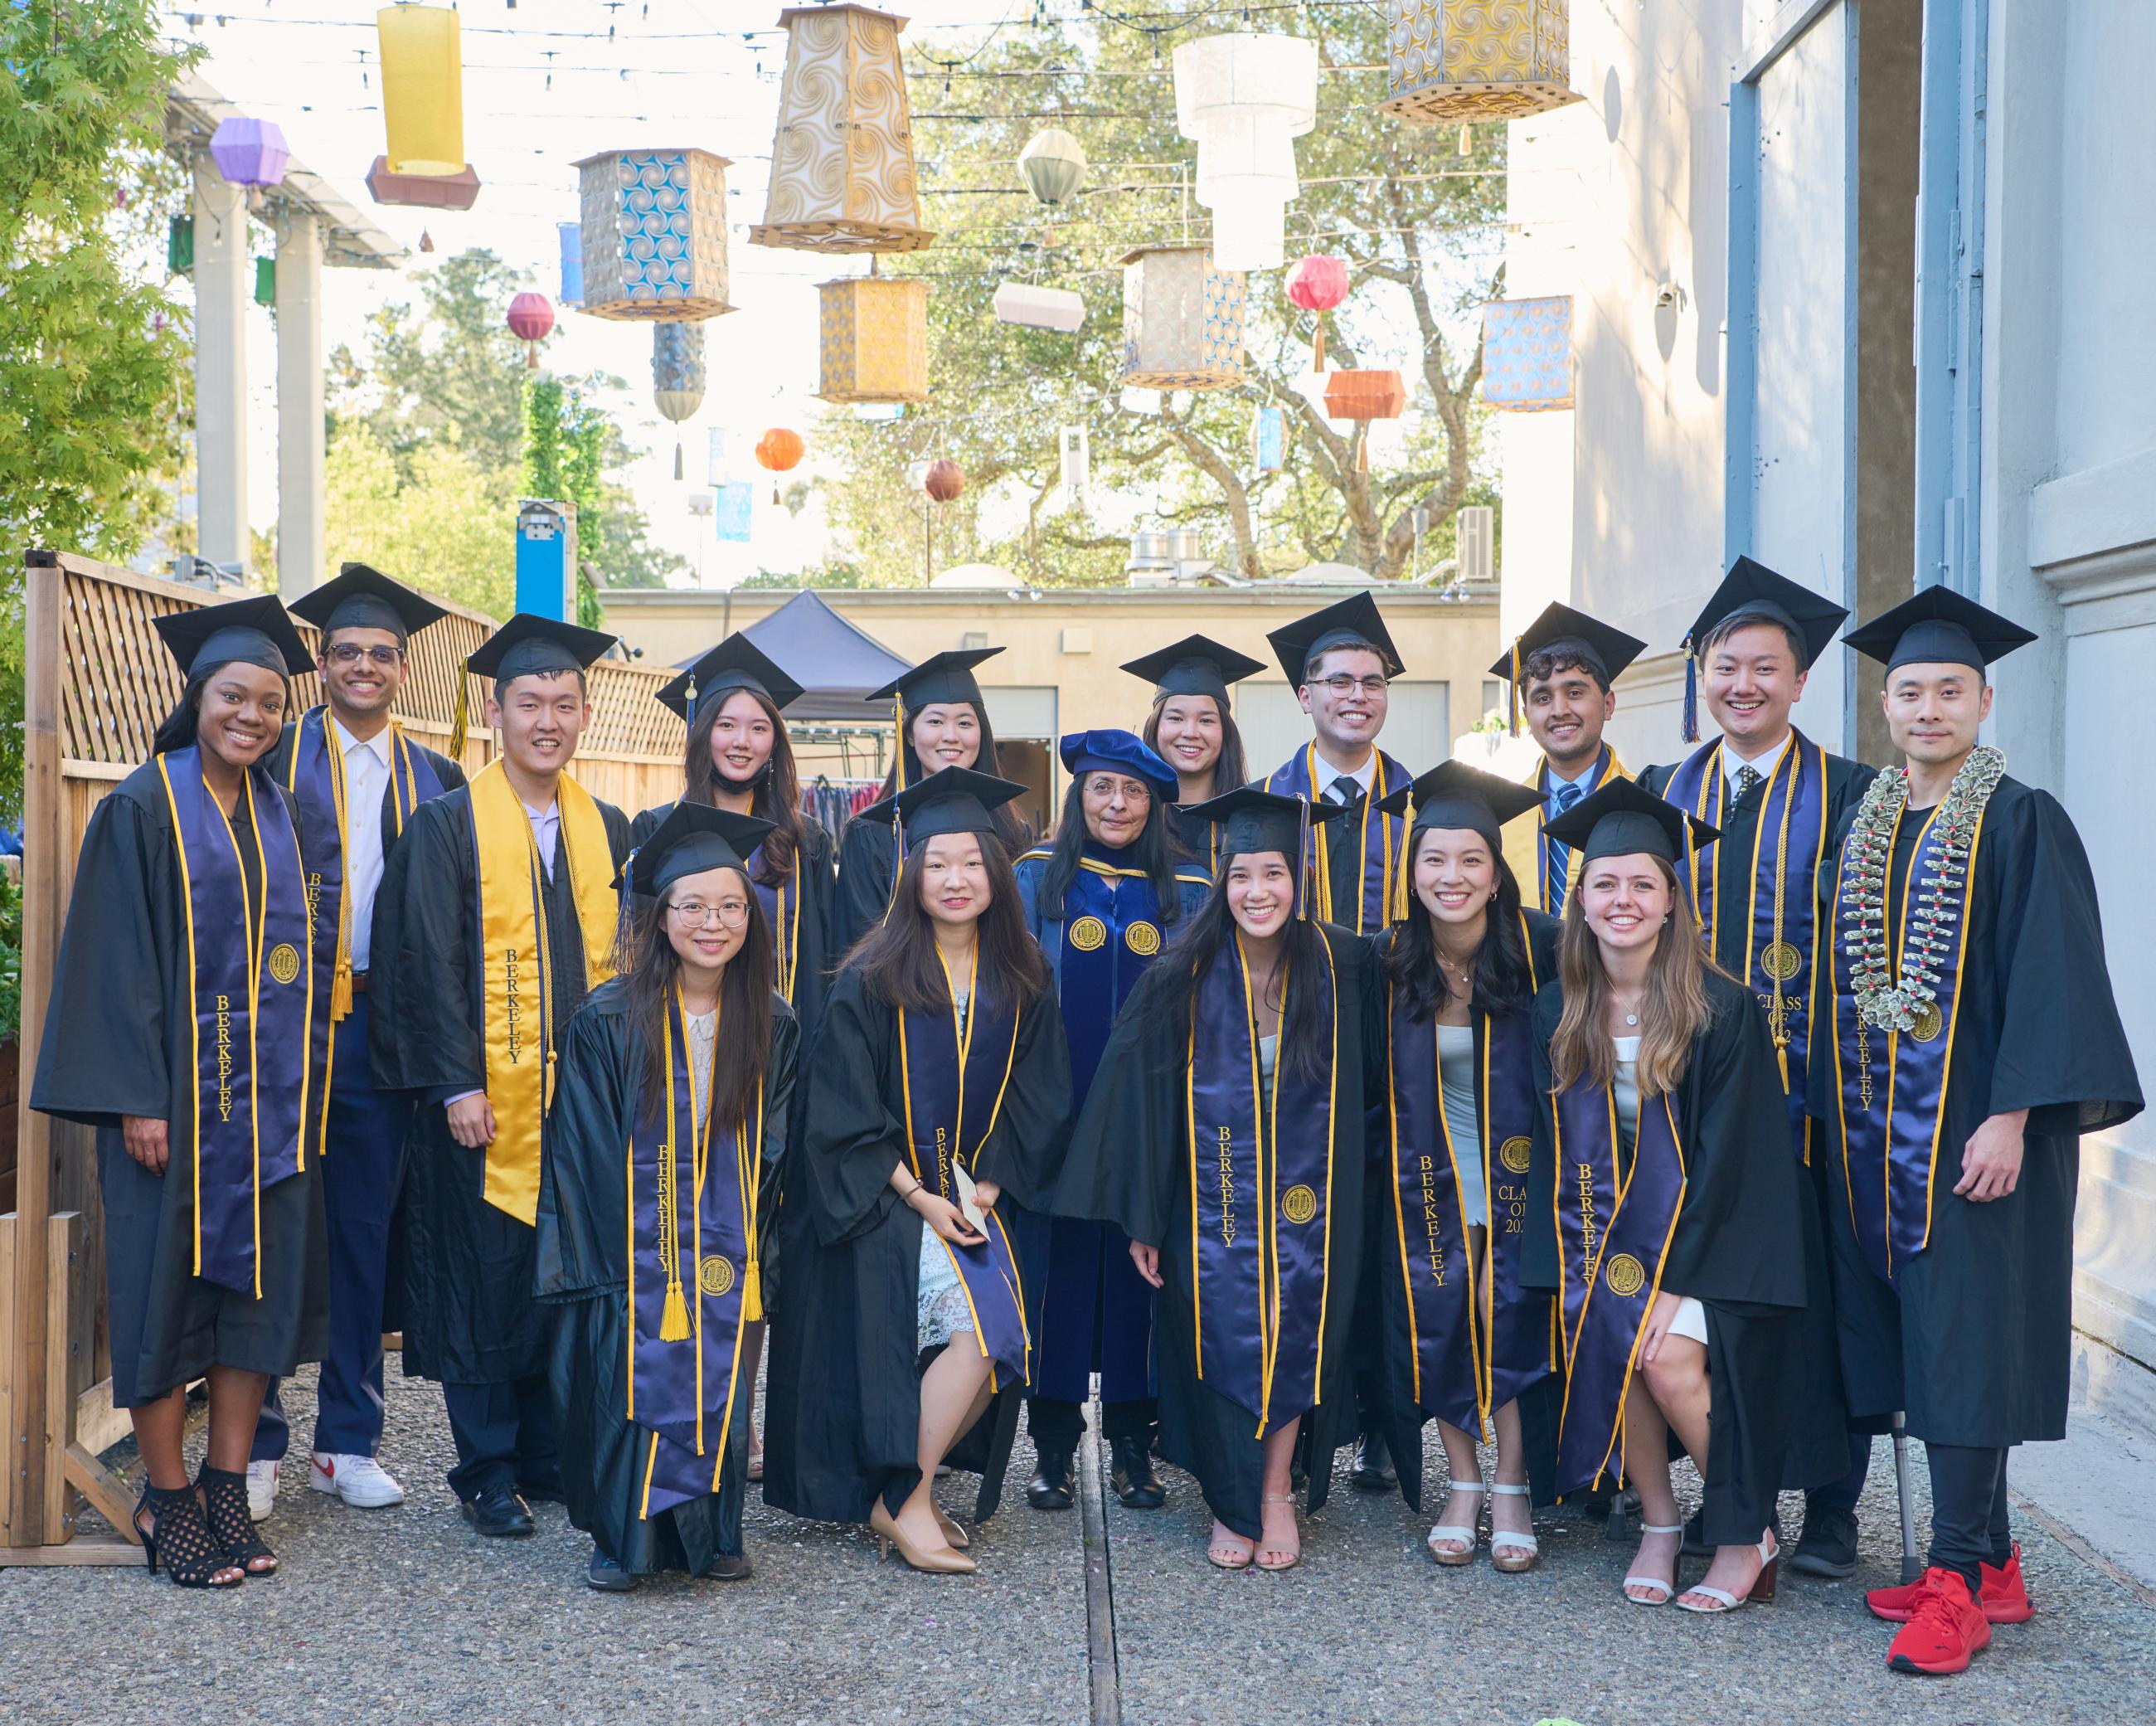 Ani Adhikari (center), faculty director of pedagogy for Data Science Undergraduate Studies, with students who received awards at the Data Science commencement on May 18. (Photo/ KLCfotos)